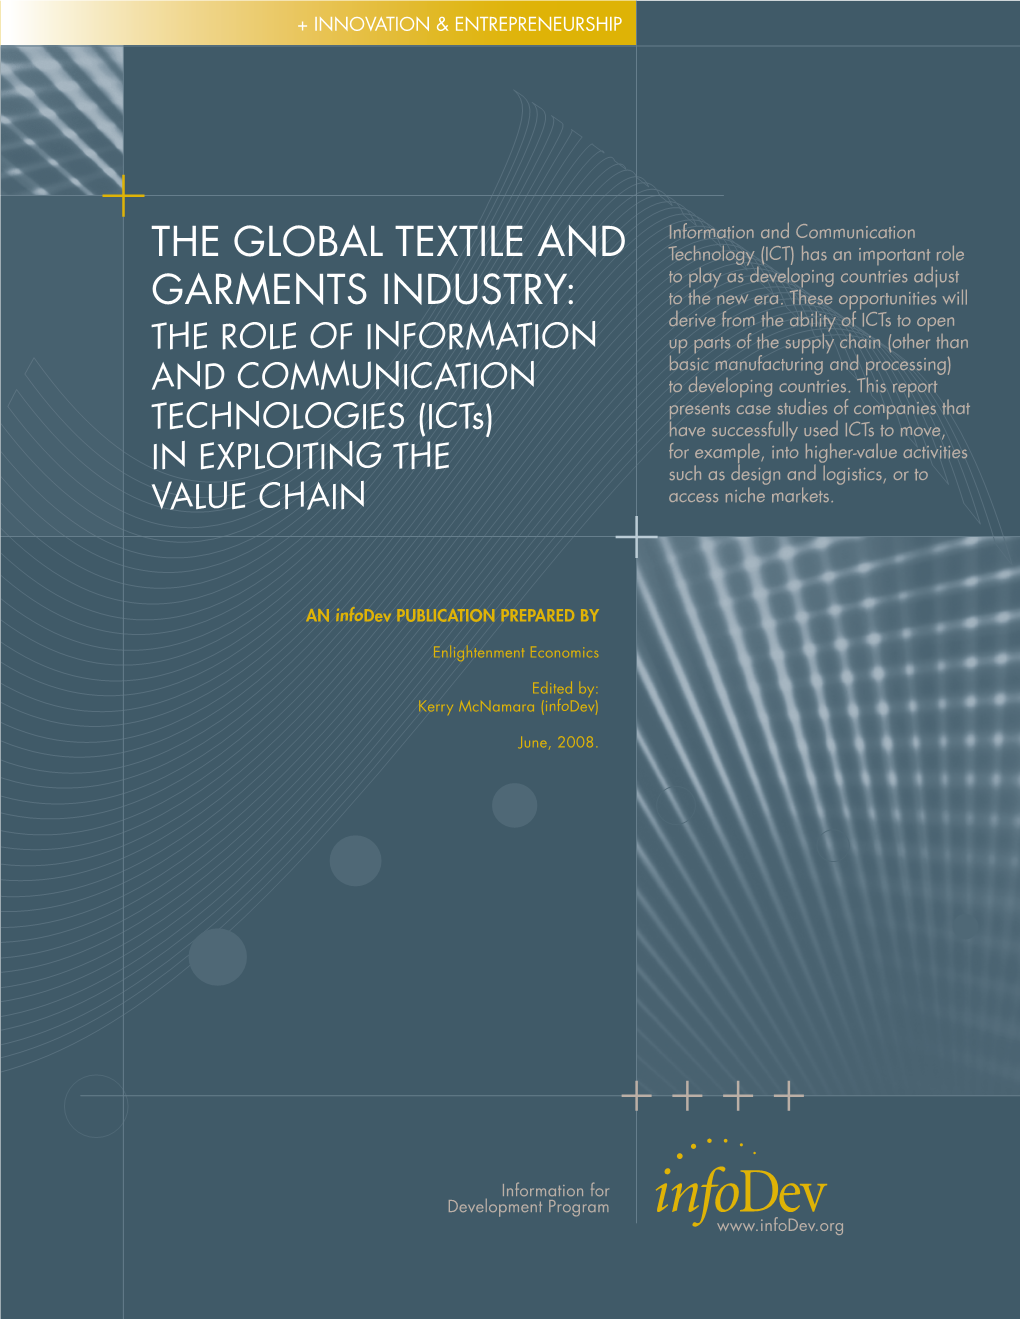 The Global Textile and Garments Industry: the Role of Icts in Exploiting the Value Chain Executive Summary